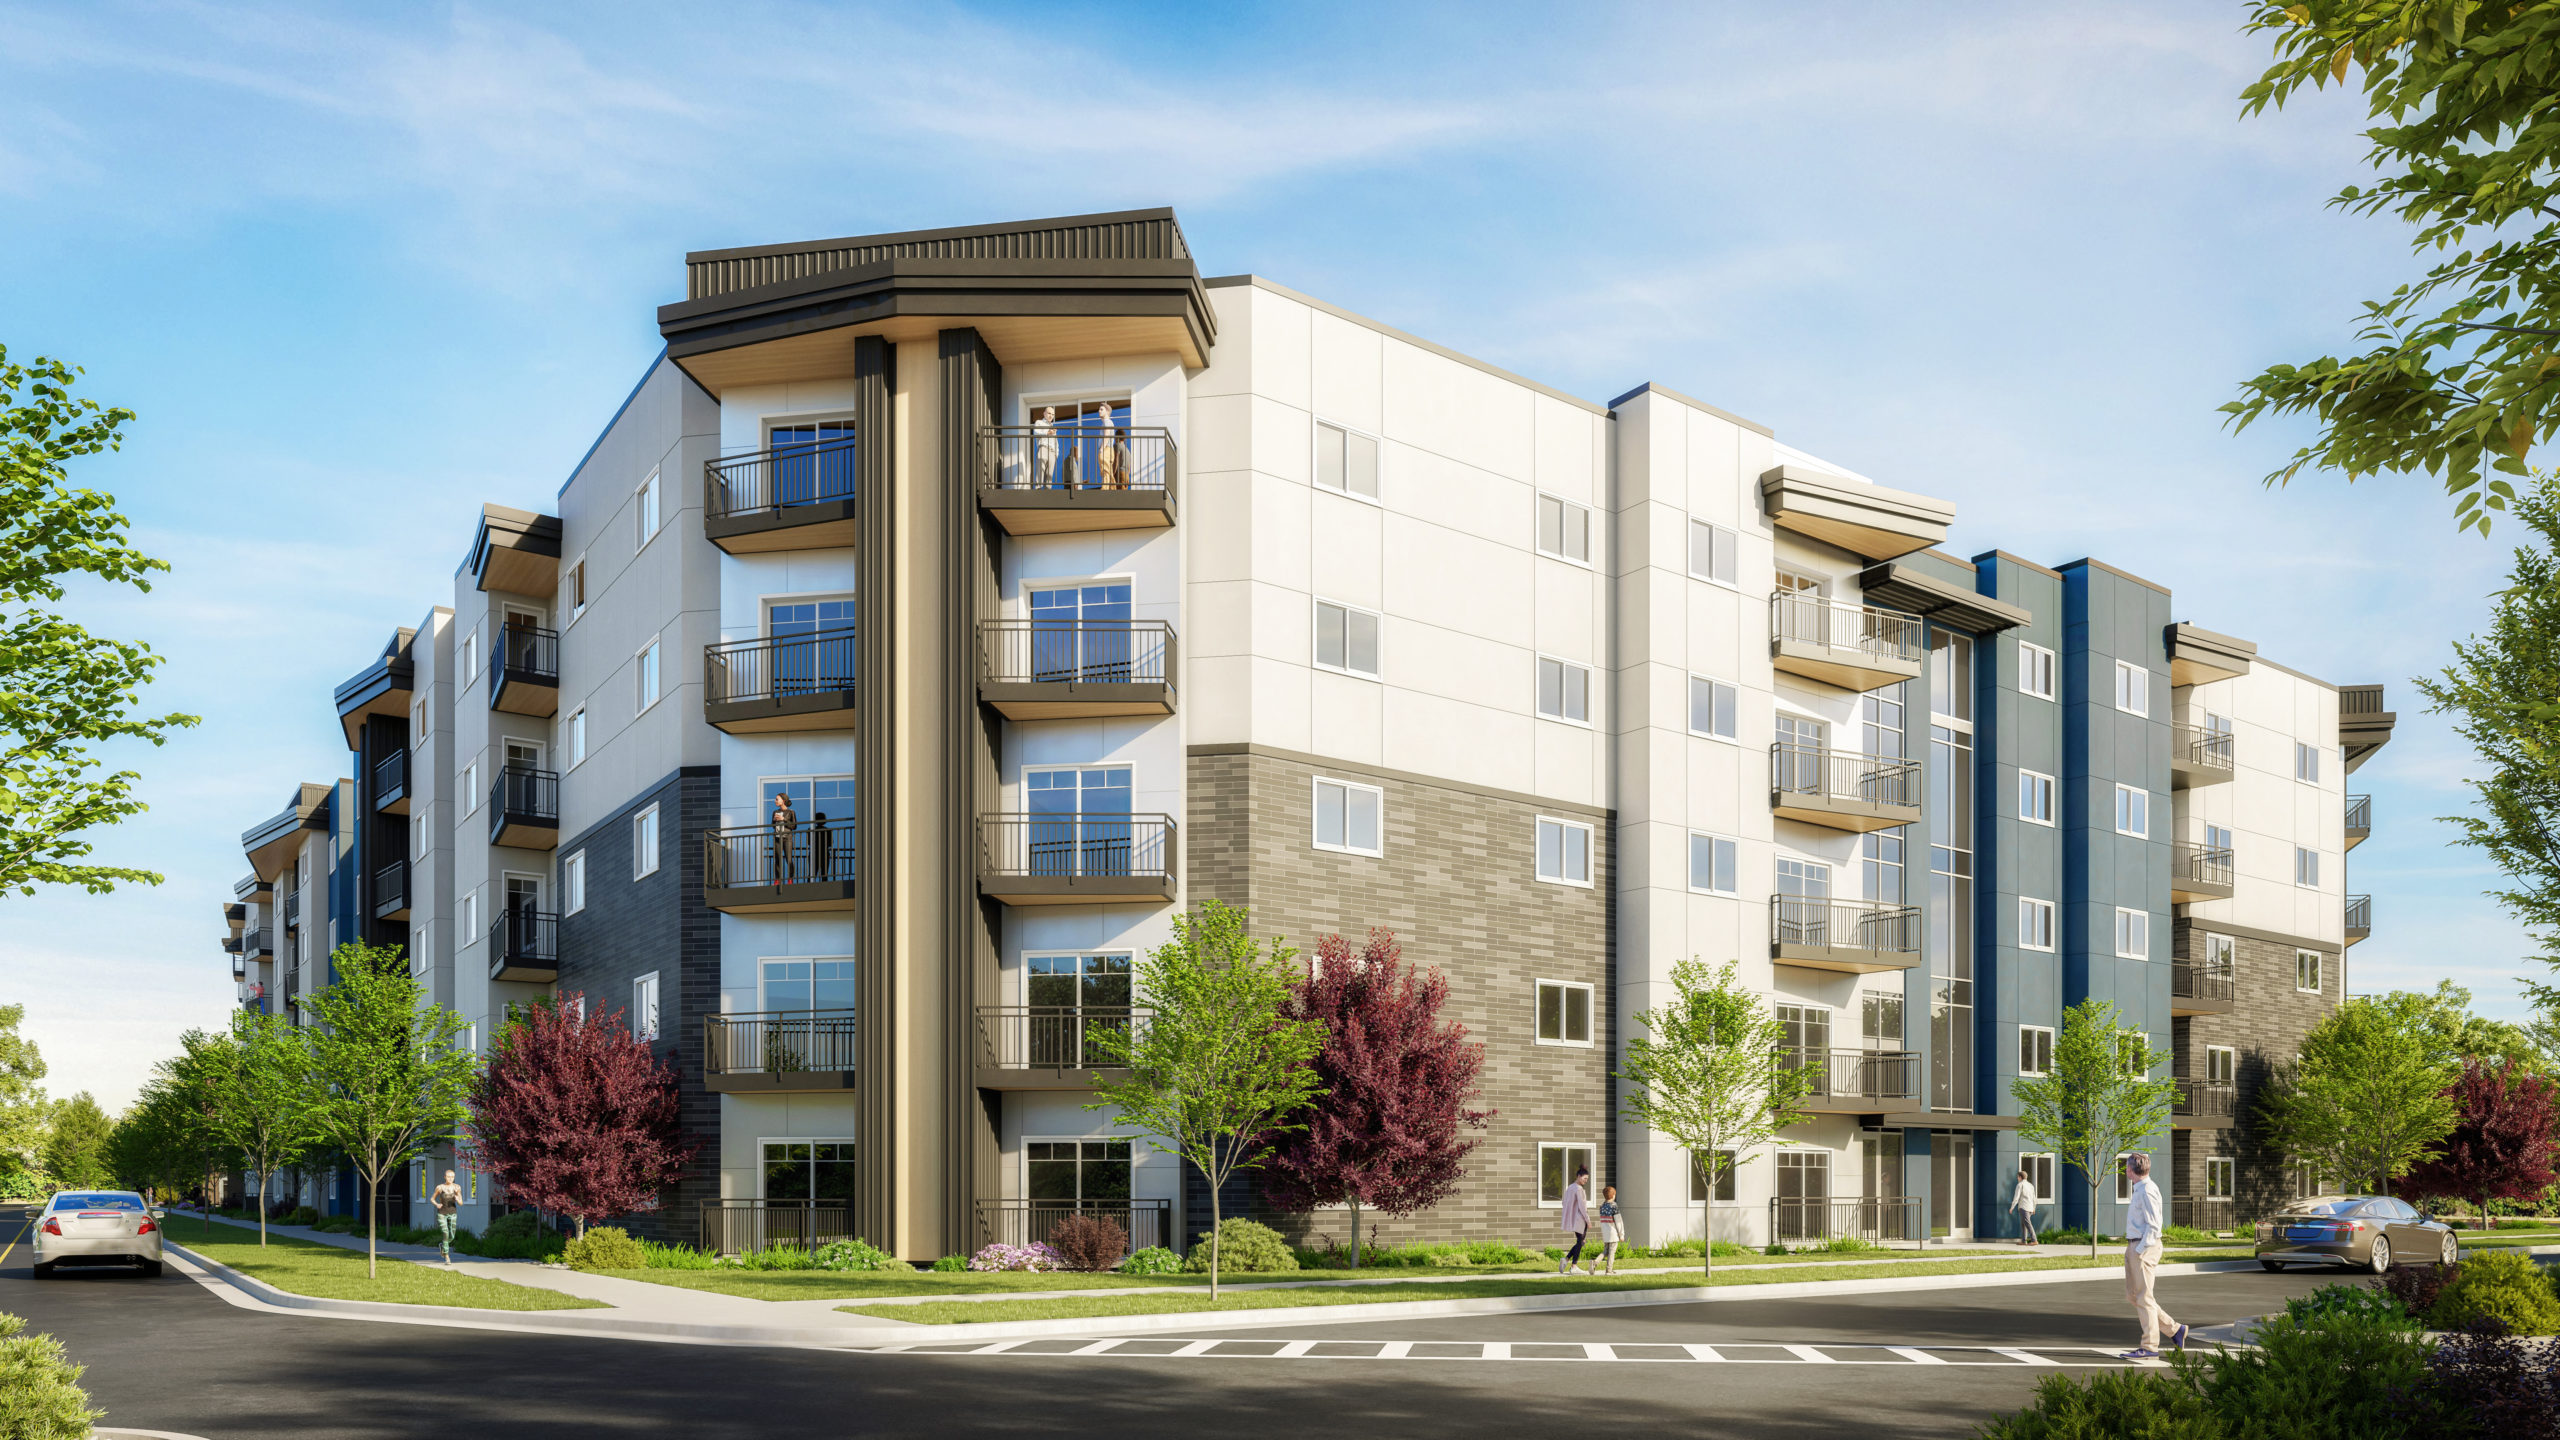 “Timberlane announced 262 units in SLC” – Daily Journal of Commerce